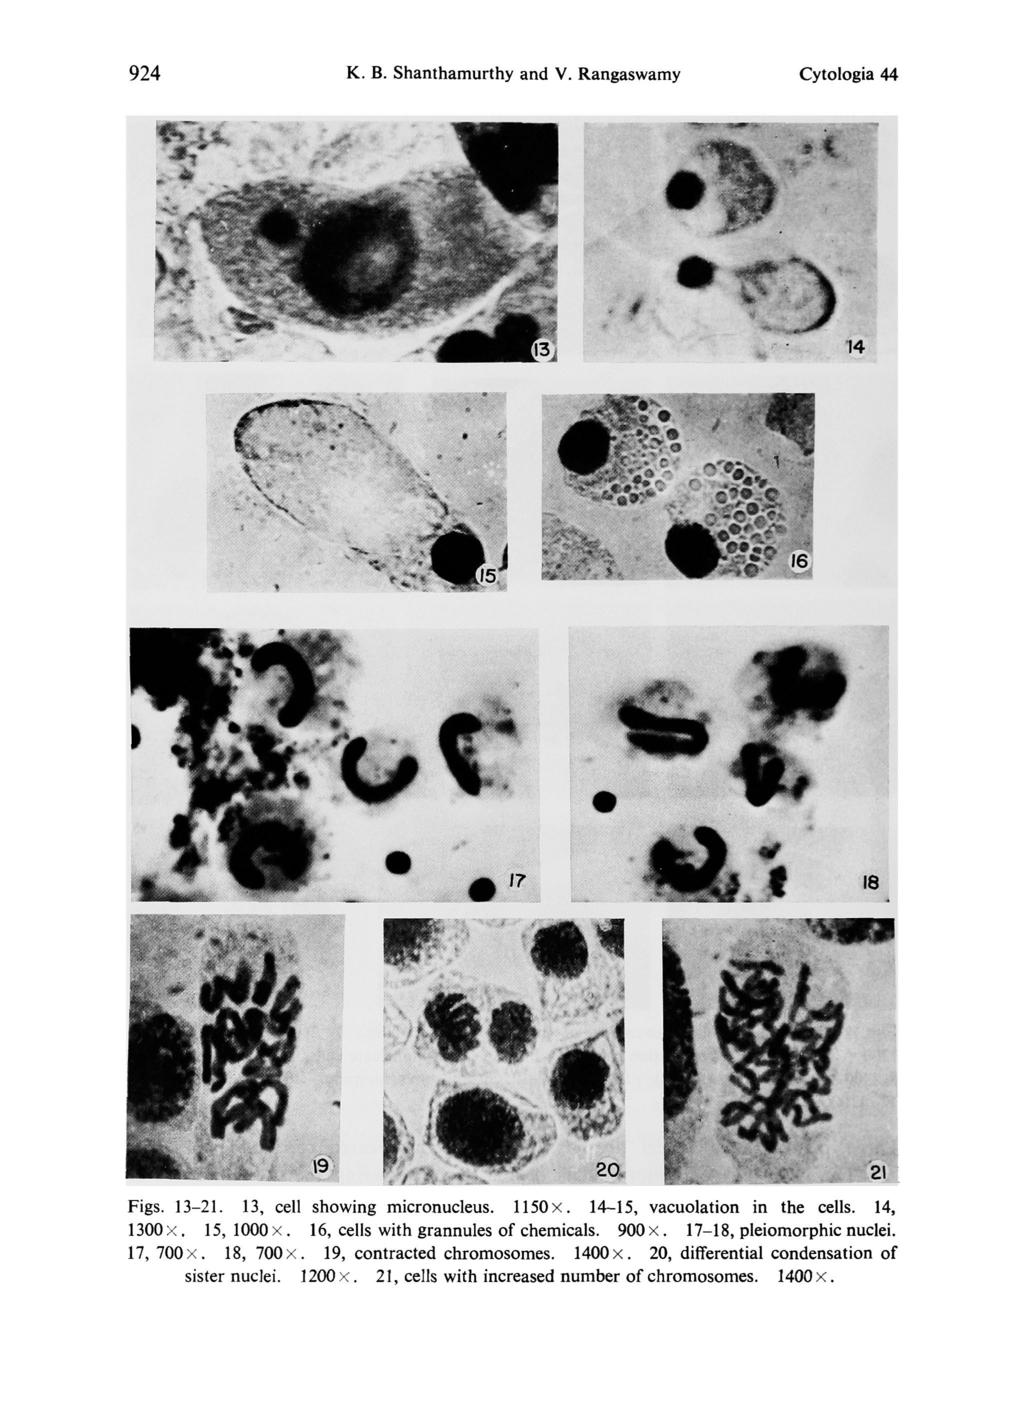 924 K. B. Shanthamurthy and V. Rangaswamy Cytologia 44 Figs. 13-21. 13, cell showing micronucleus. 1150 ~. 14-15, vacuolation in the cells. 14, 1300 ~. 15, 1000 ~.